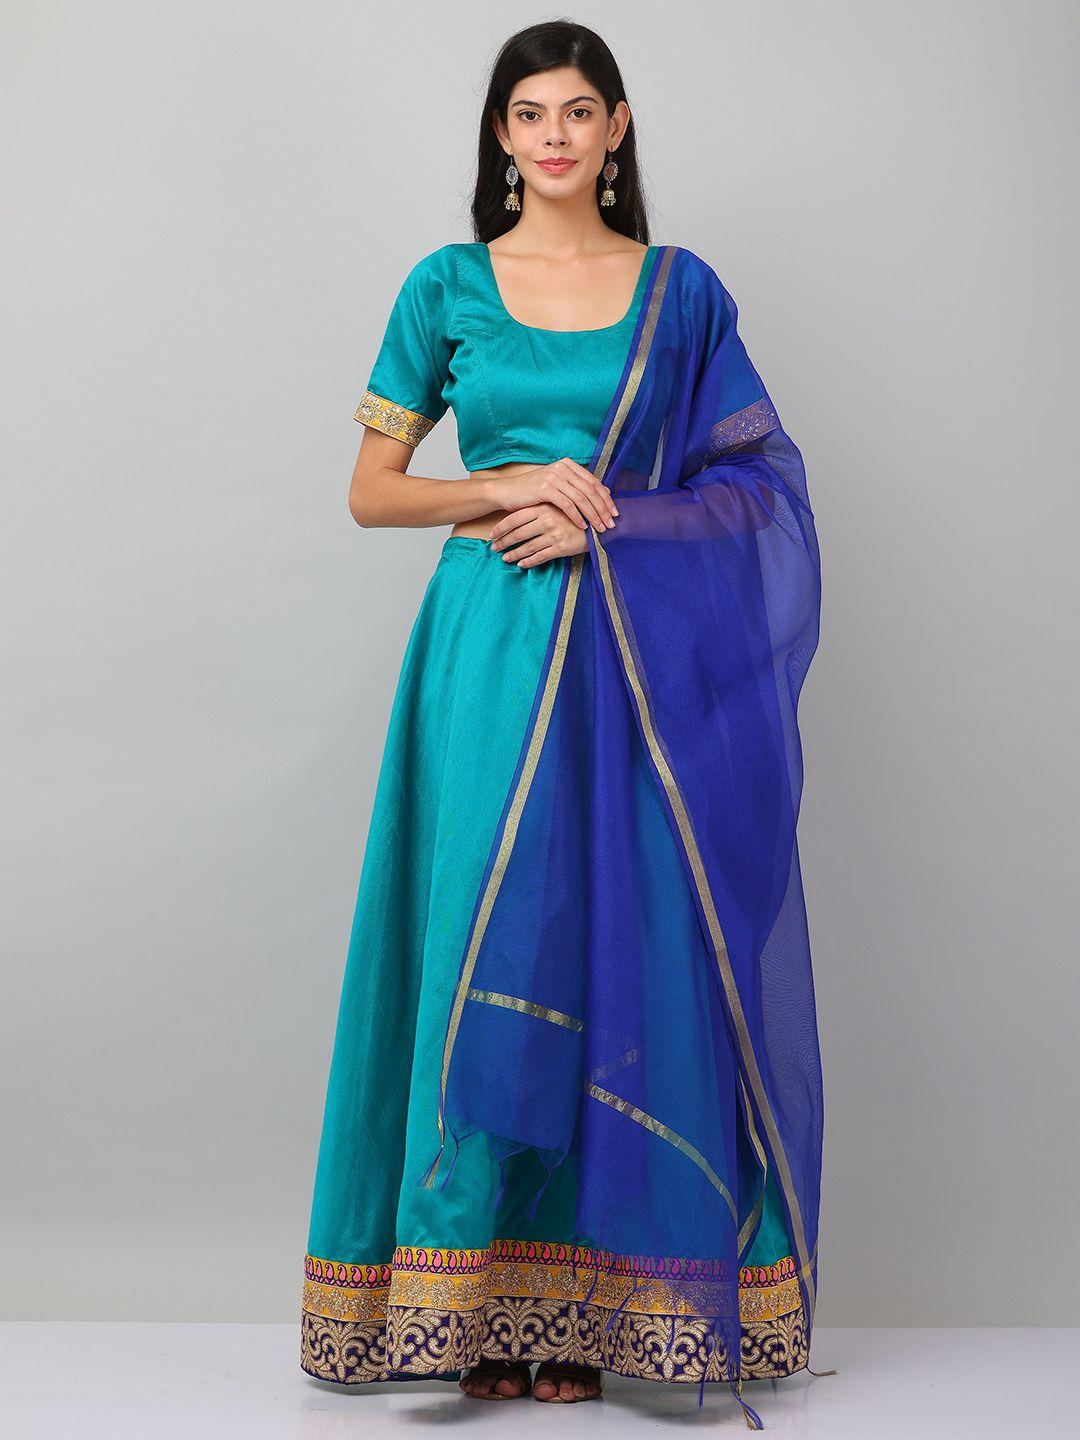 kaanchie nanggia turquoise blue & gold-toned ready to wear lehenga & blouse with dupatta